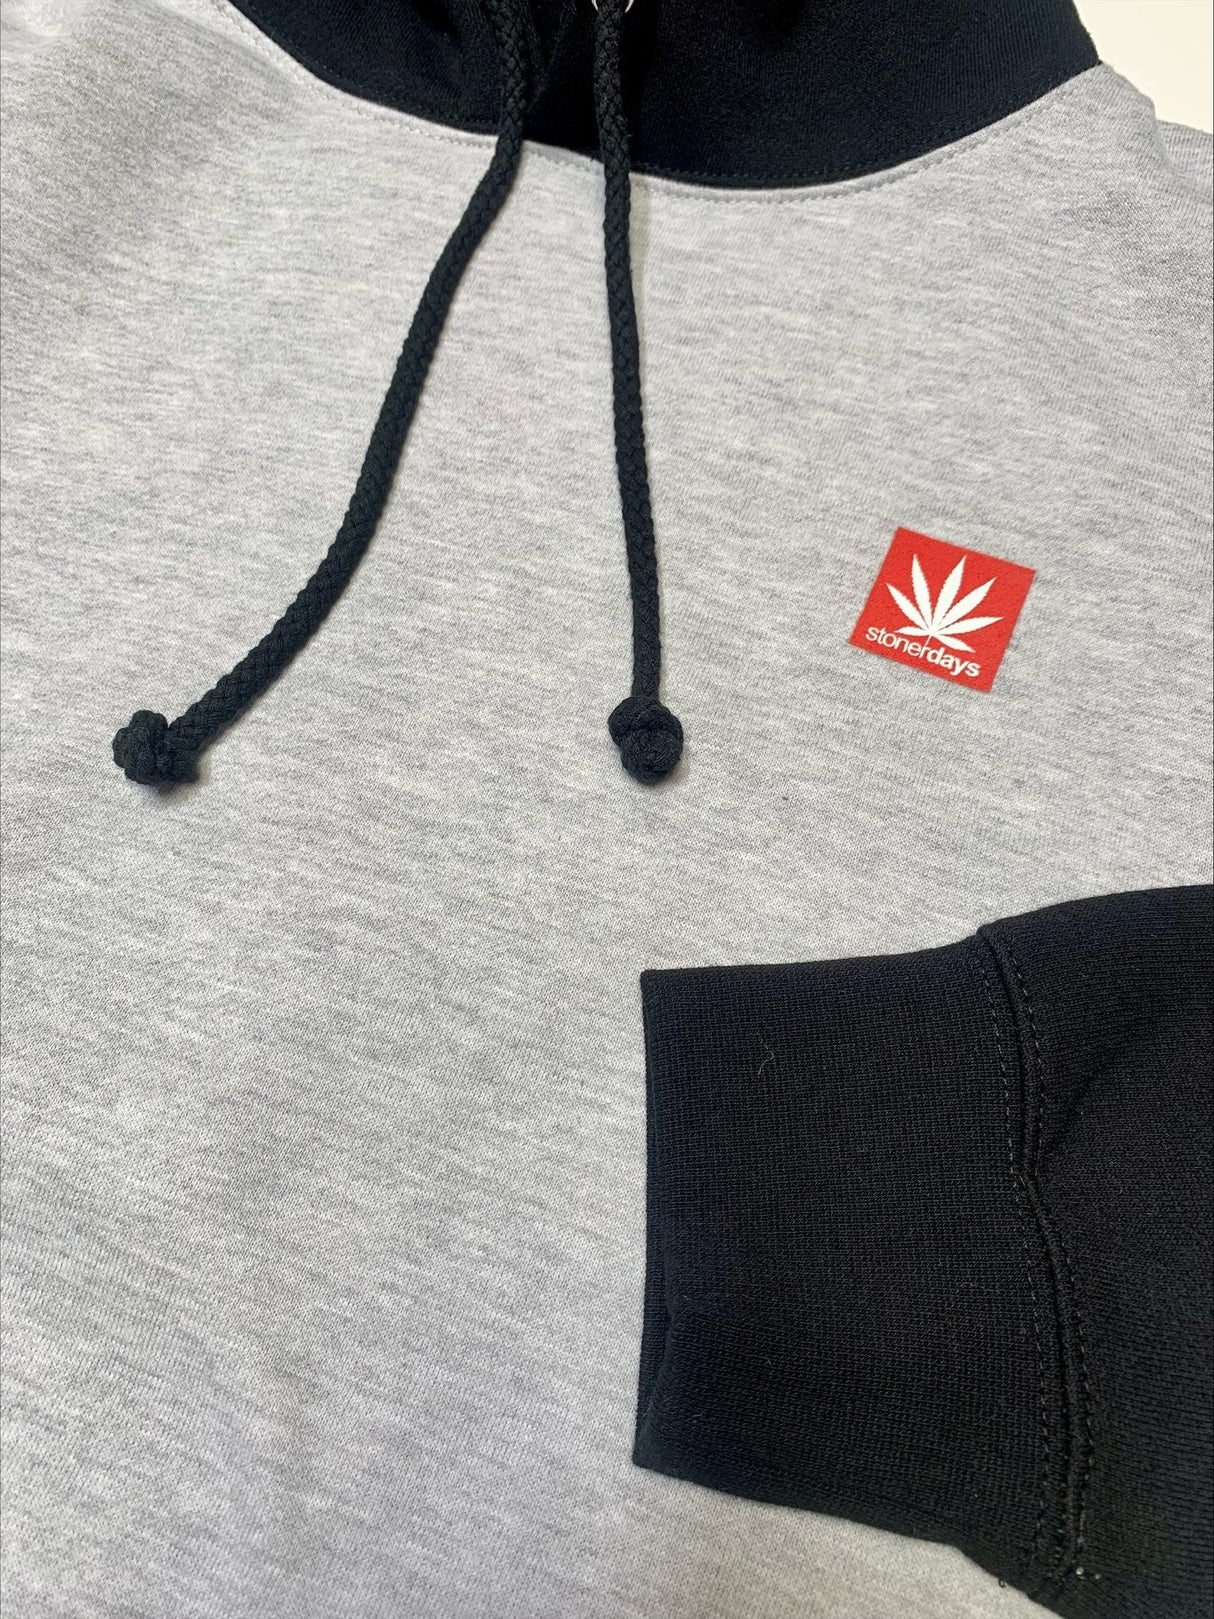 Close-up of StonerDays Two Tone Hoodie in small, featuring logo on gray and black fabric